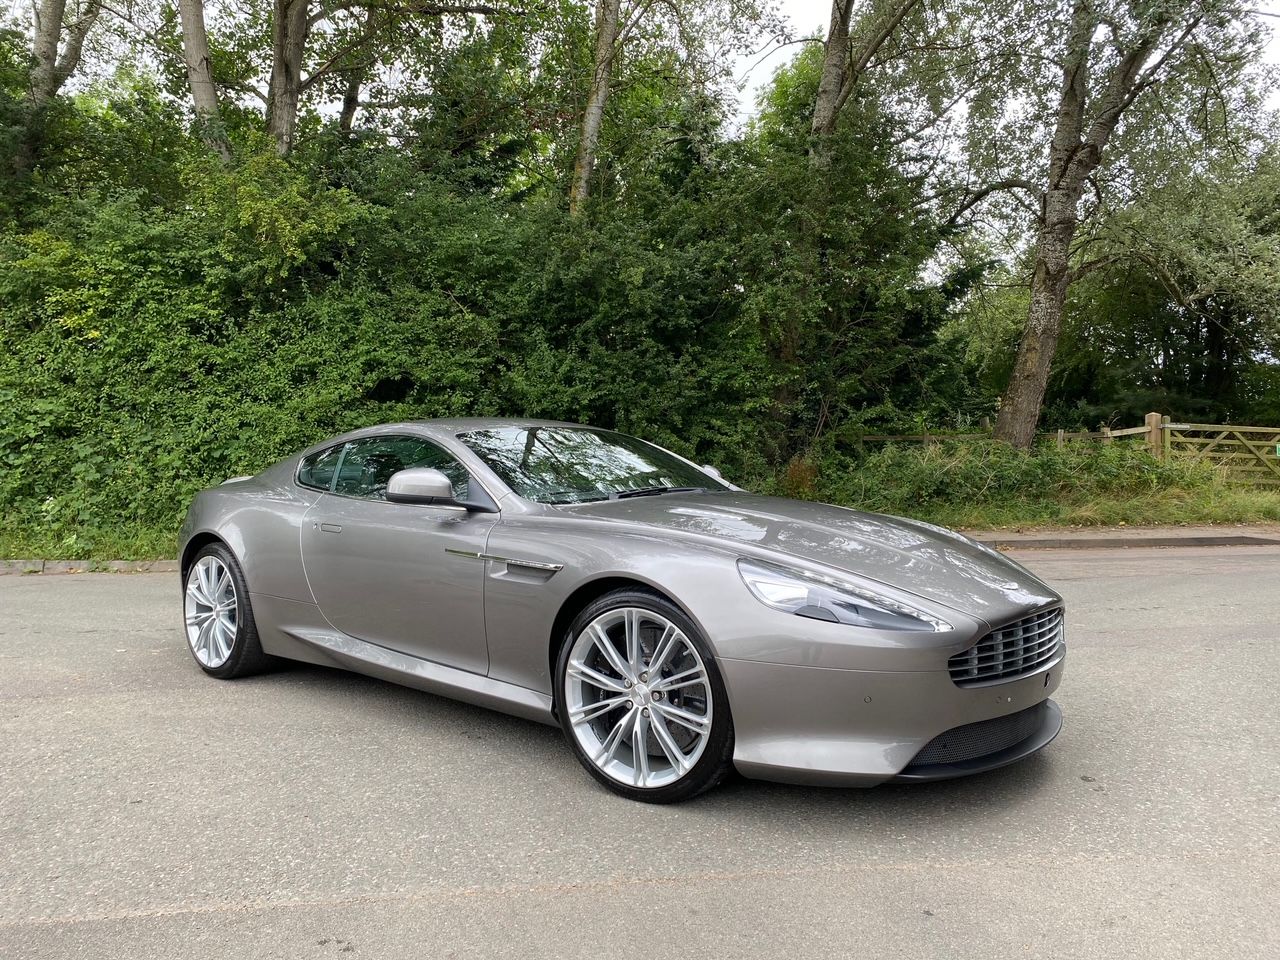 Used DB9 Coupe for Sale